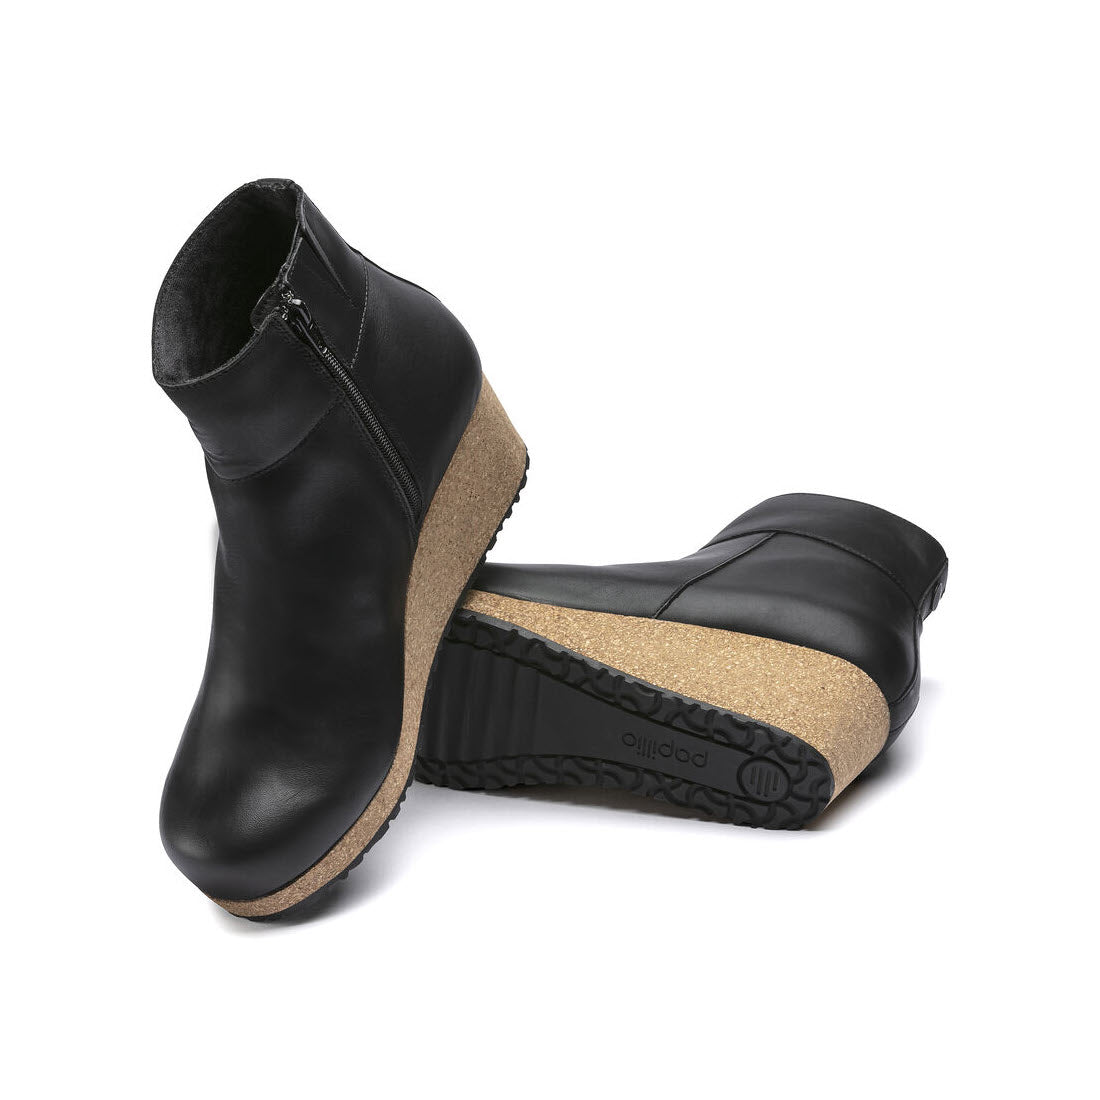 A pair of Birkenstock Papillio Ebba Black Leather ankle boots with zippers, featuring cork midsoles and black rubber outsoles, displayed on a white background.